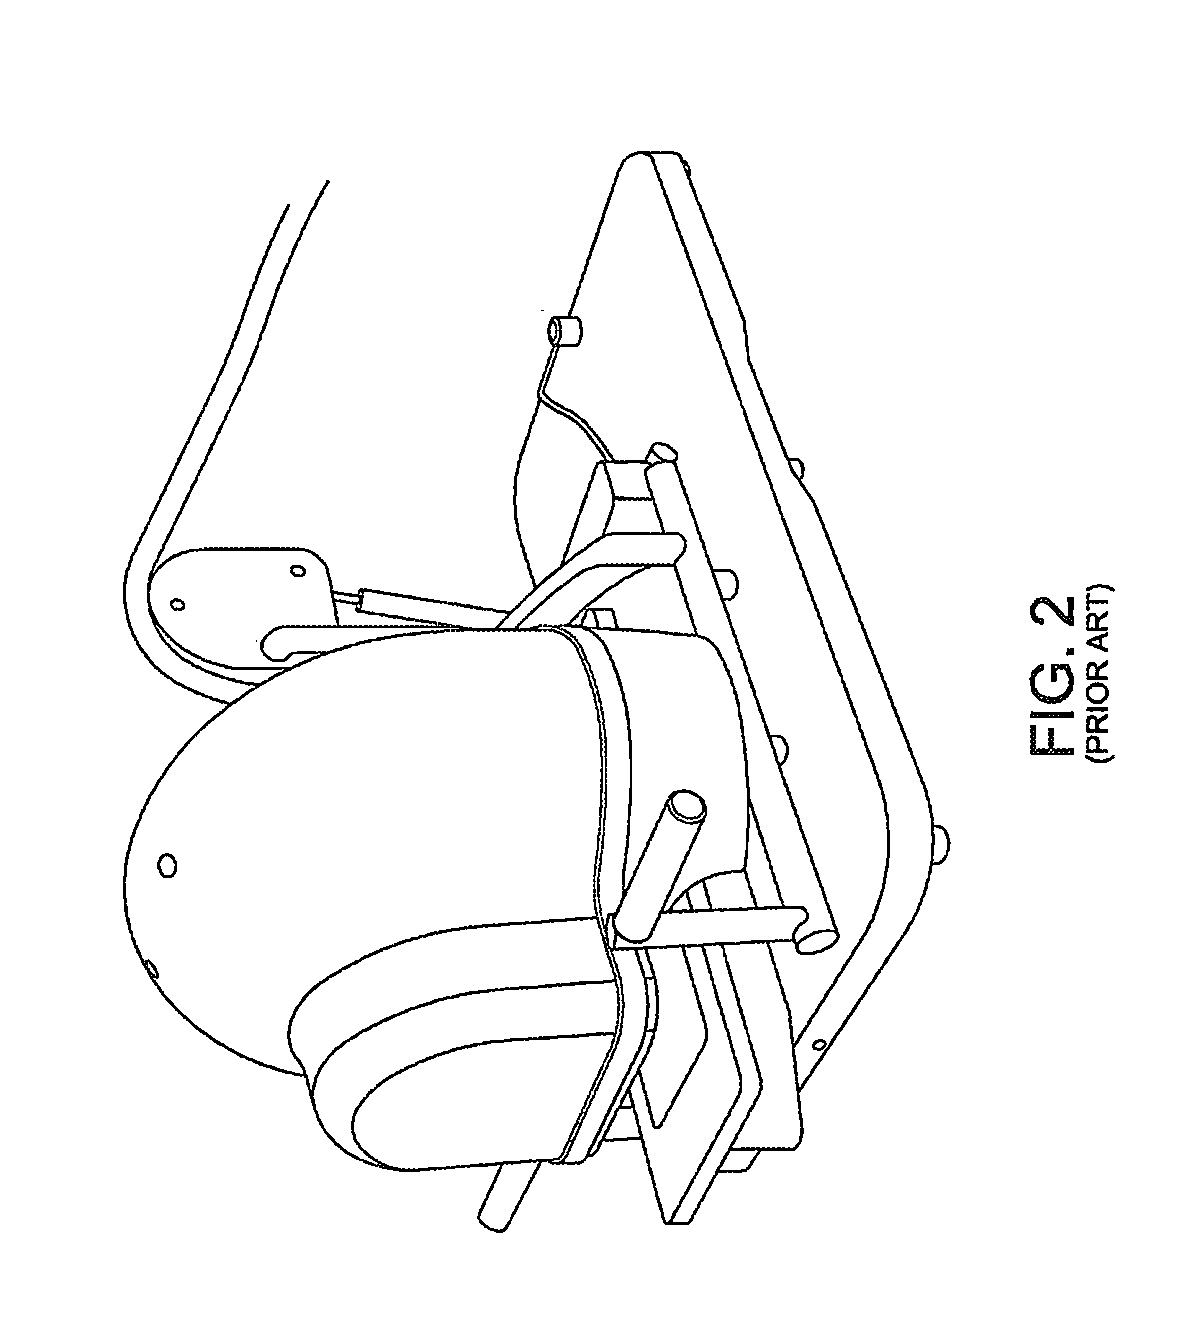 Combined stimulator and electrode assembly for mouse electroretinography (ERG)